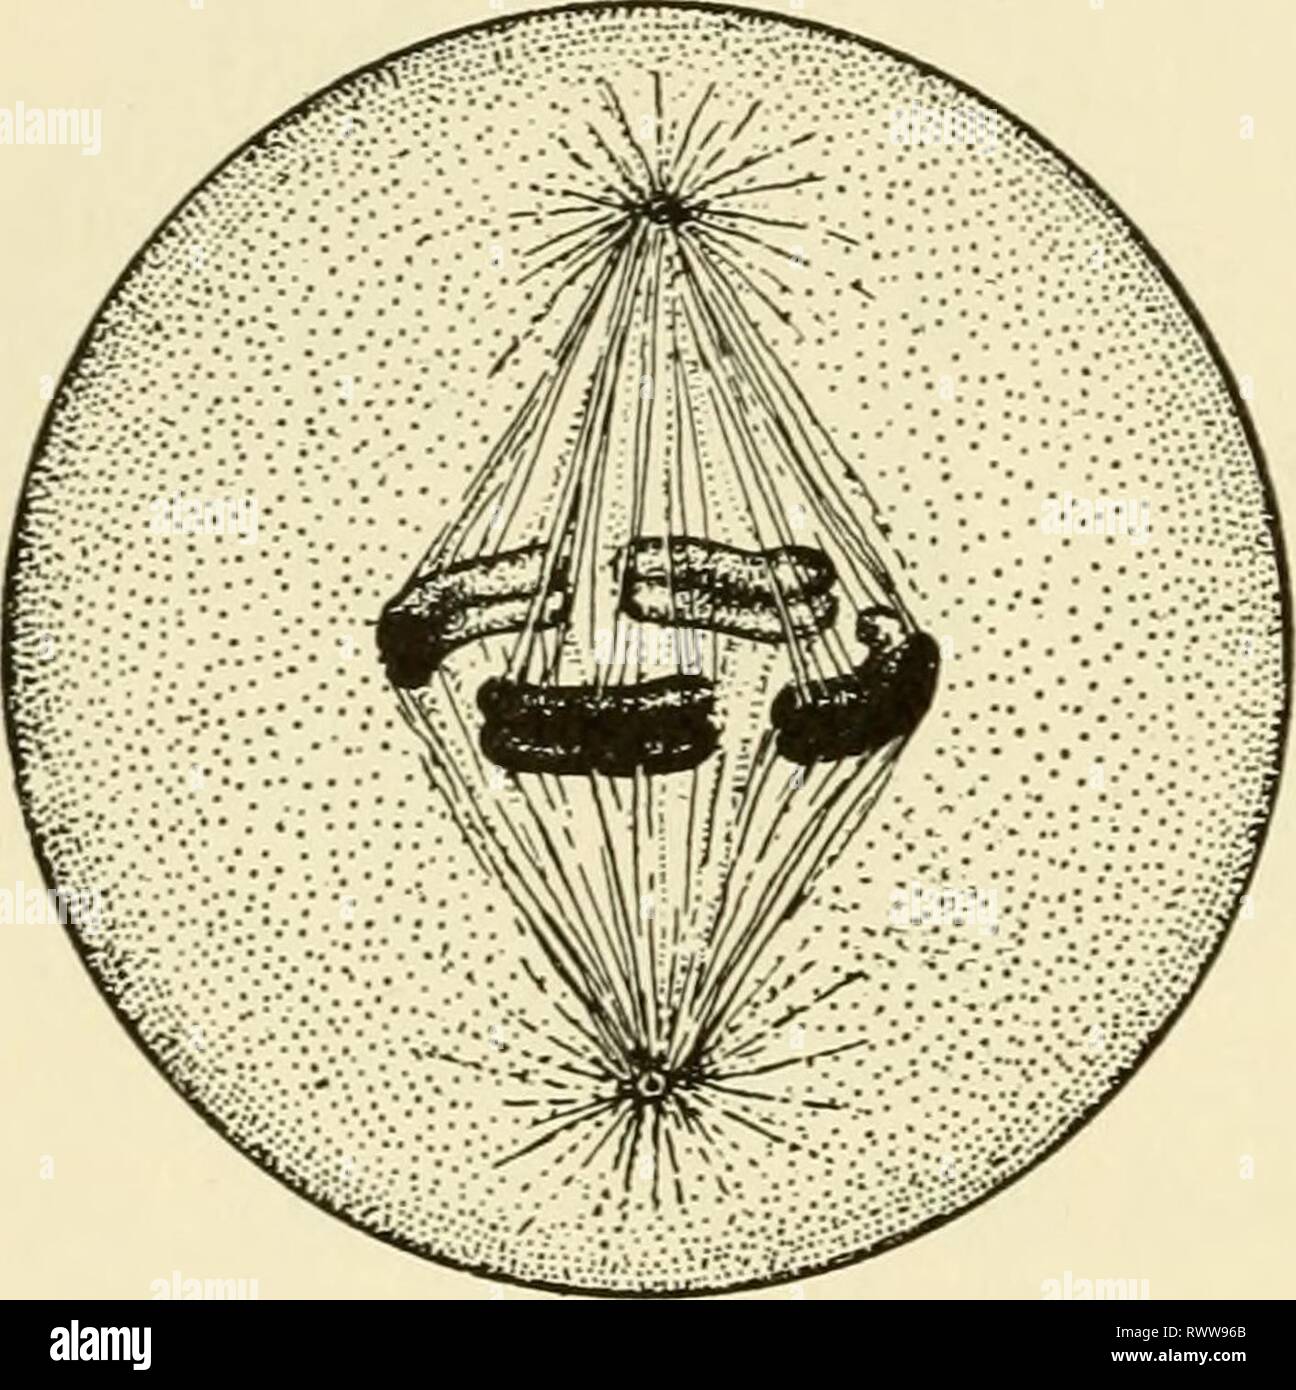 Elements of biology, with special Elements of biology, with special reference to their rôle in the lives of animals elementsofbiolog00buch Year: 1933  3o8 ELEMENTS OF BIOLOGY them. While the asters are thus migrating the chromatin granules within the nucleus become arranged into a distinct thread, known as a SPIREME because o£ its coiled arrangement, and the membrane around the nucleus begins to disappear, being transformed by some unknown process of metabolism. The spireme presently is resolved into a number of rods or other shaped units of chromatin known as CHROMOSOMES. As the nuclear membr Stock Photo